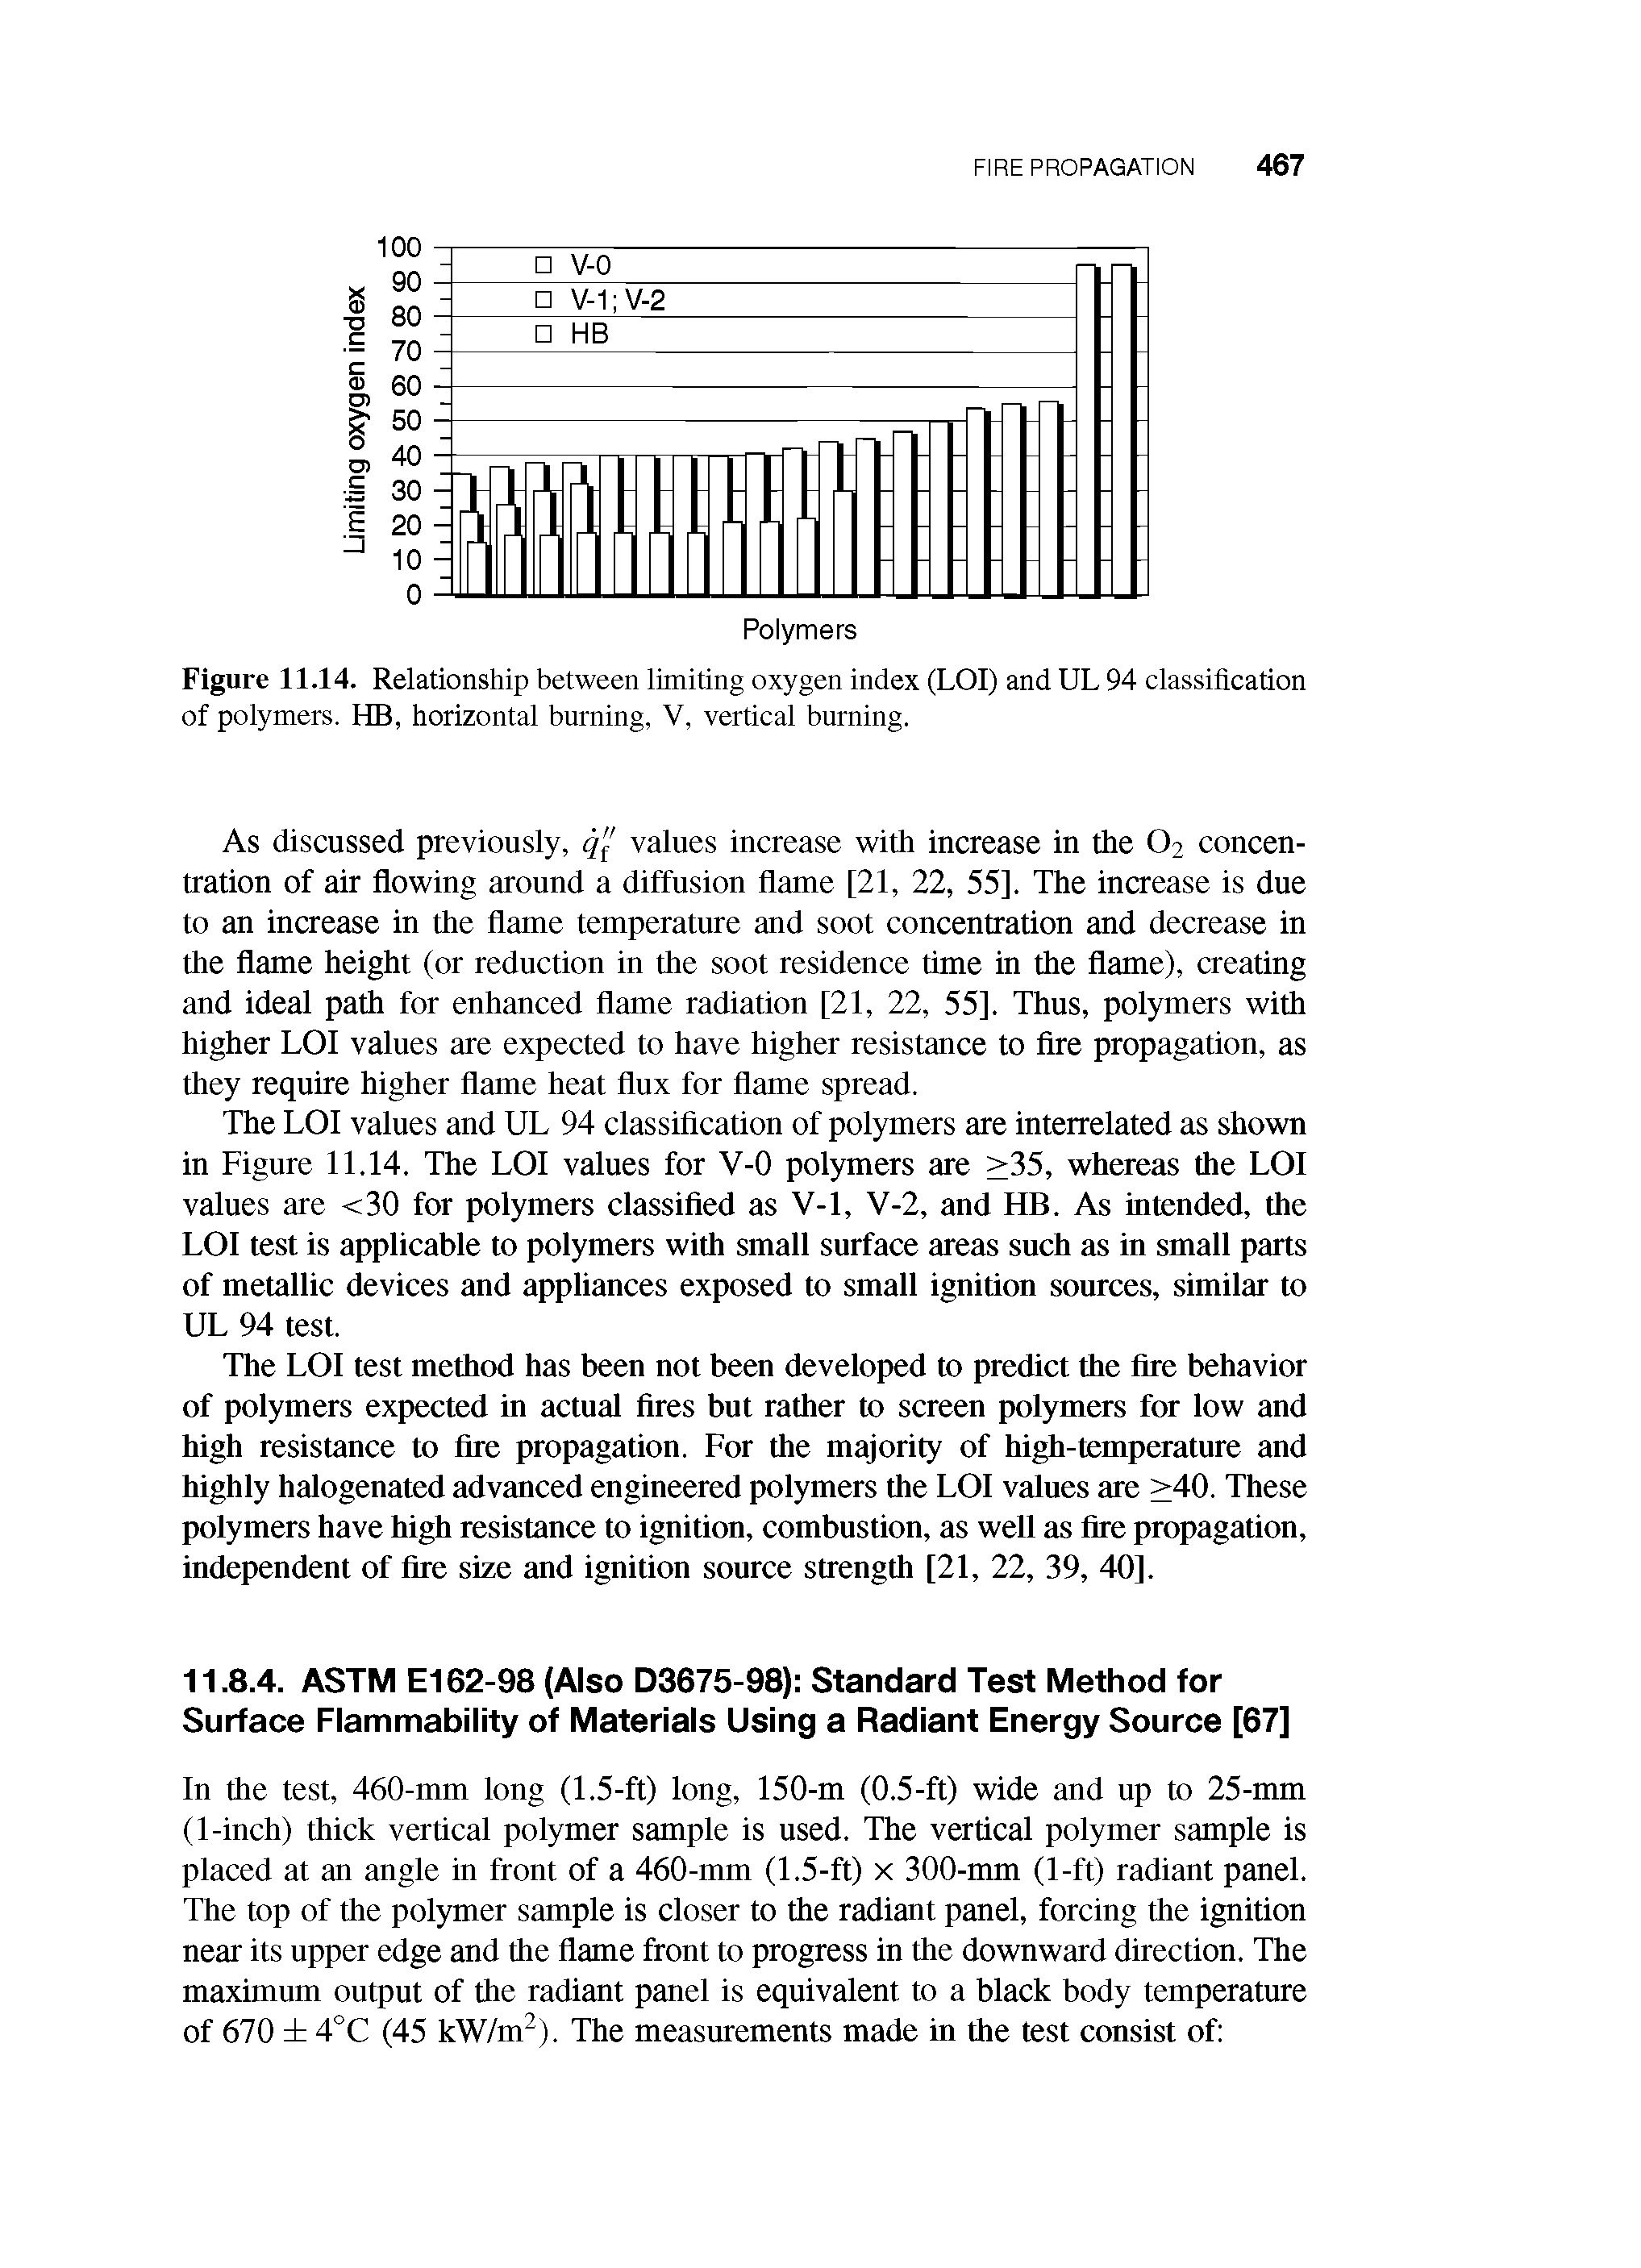 Figure 11.14. Relationship between limiting oxygen index (LOI) and UL 94 classification of polymers. HB, horizontal burning, V, vertical burning.